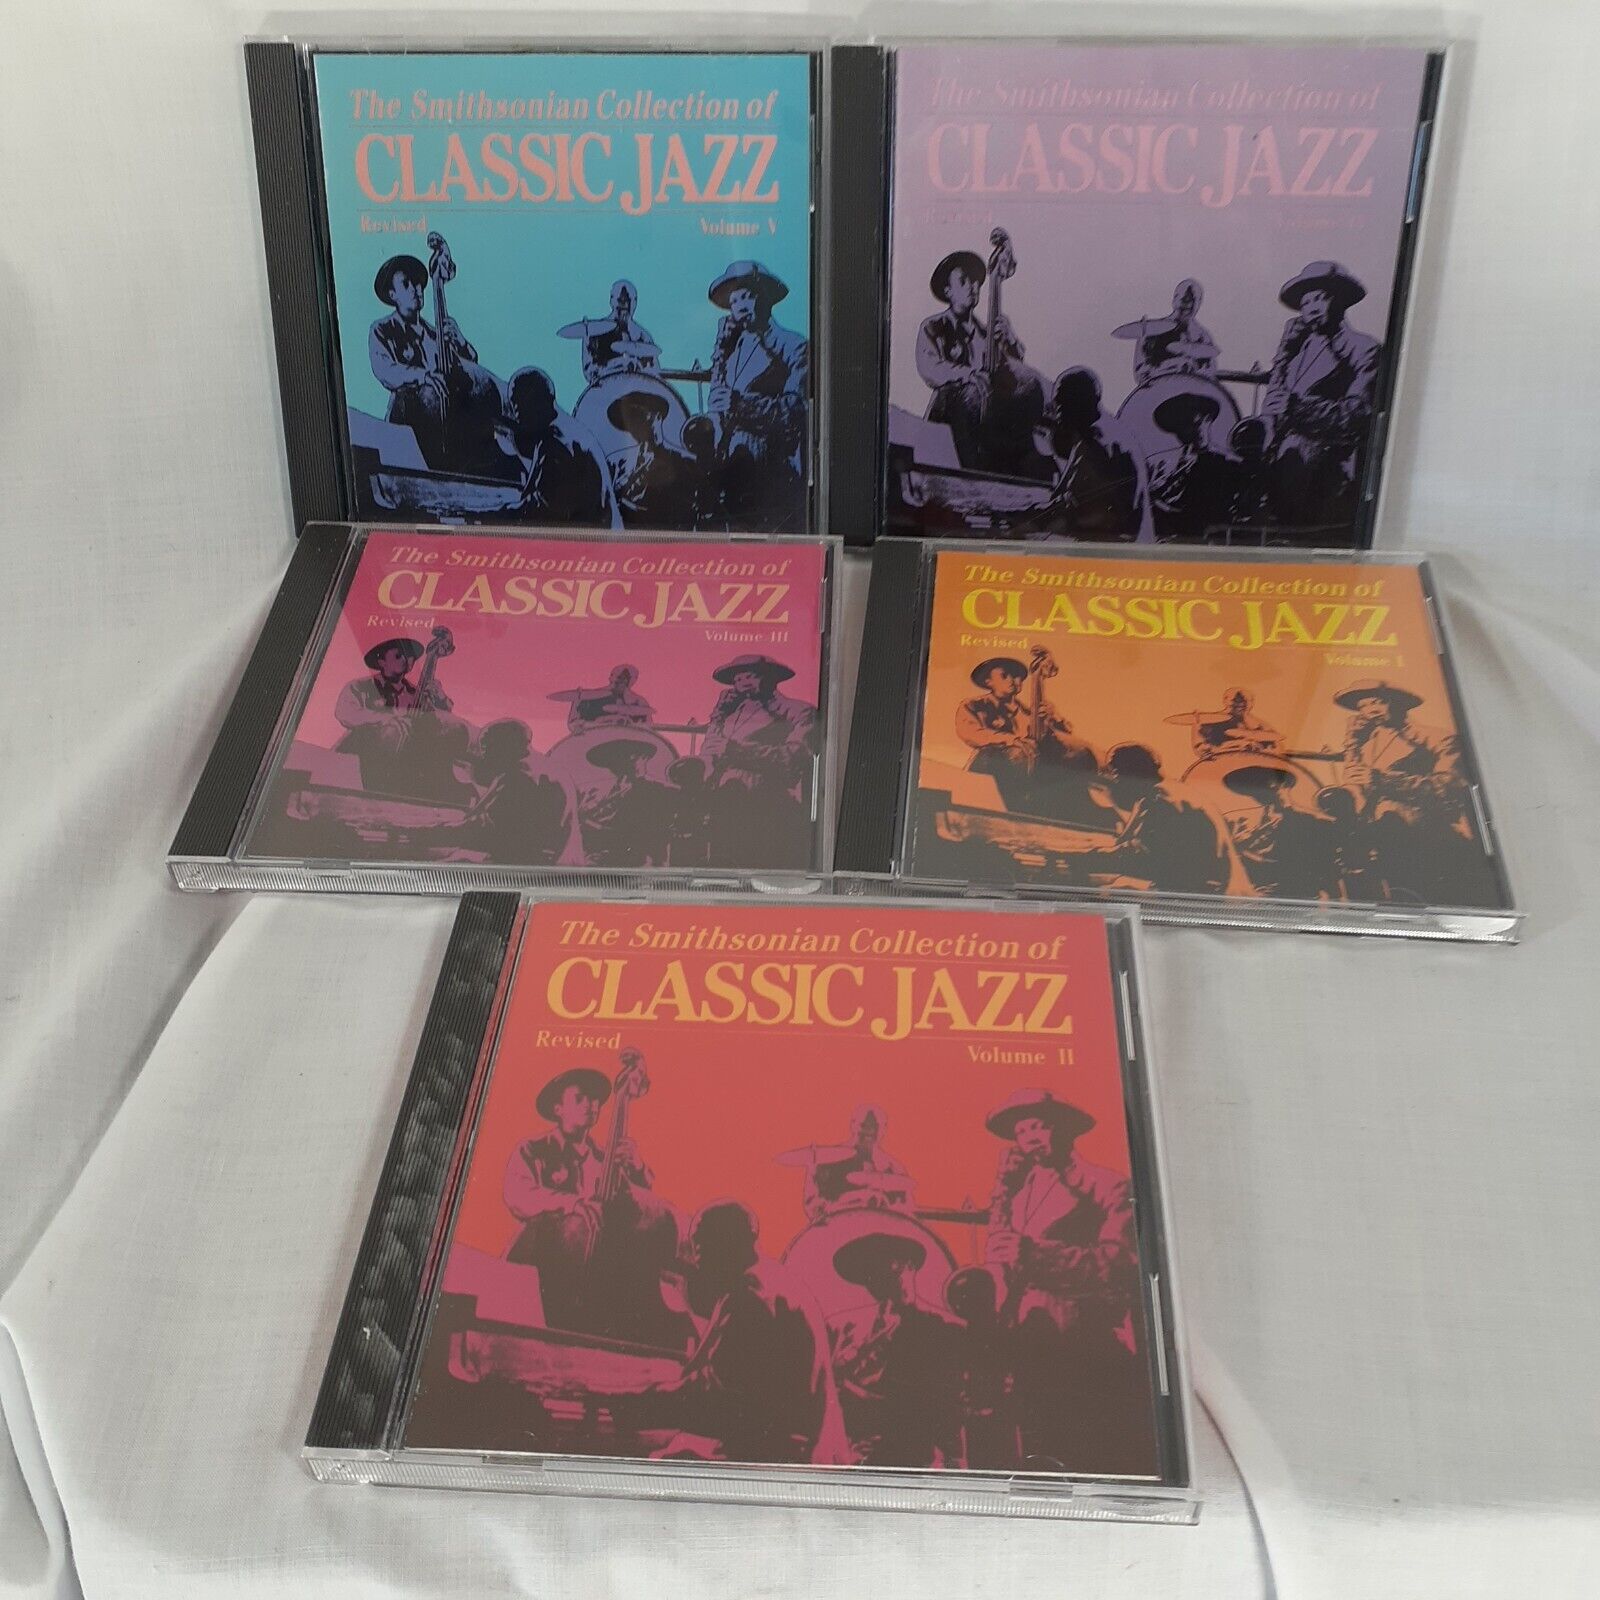 5 Cd Set The Smithsonian Collection of Classic Jazz 1987 -94 Tracks Volumes 1-5